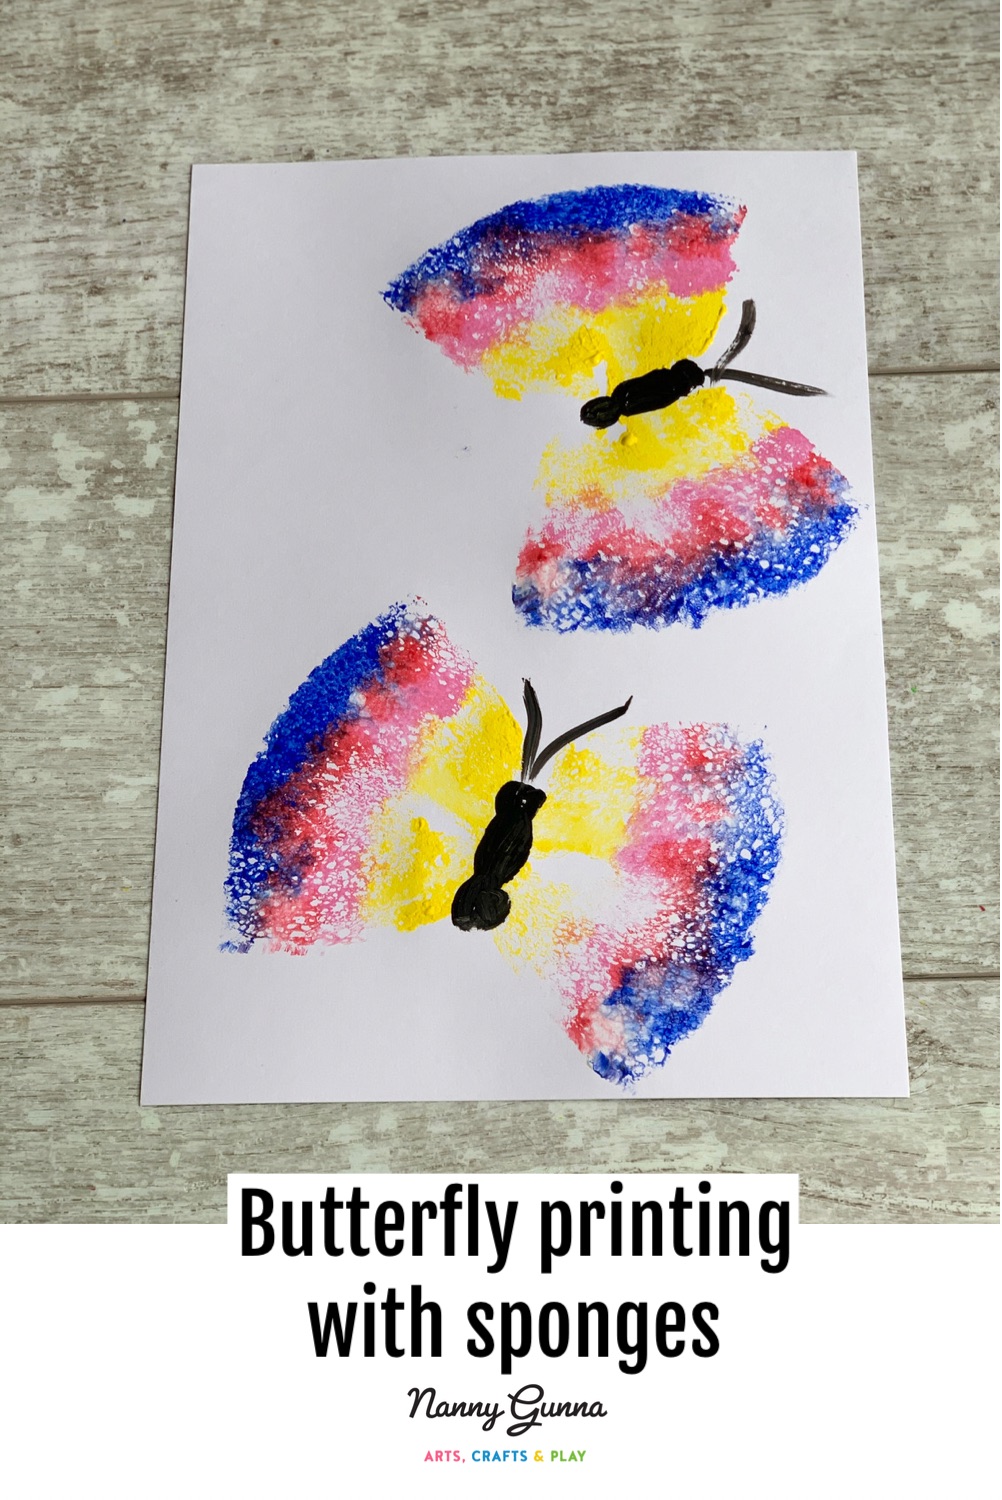 Butterfly printing with sponges